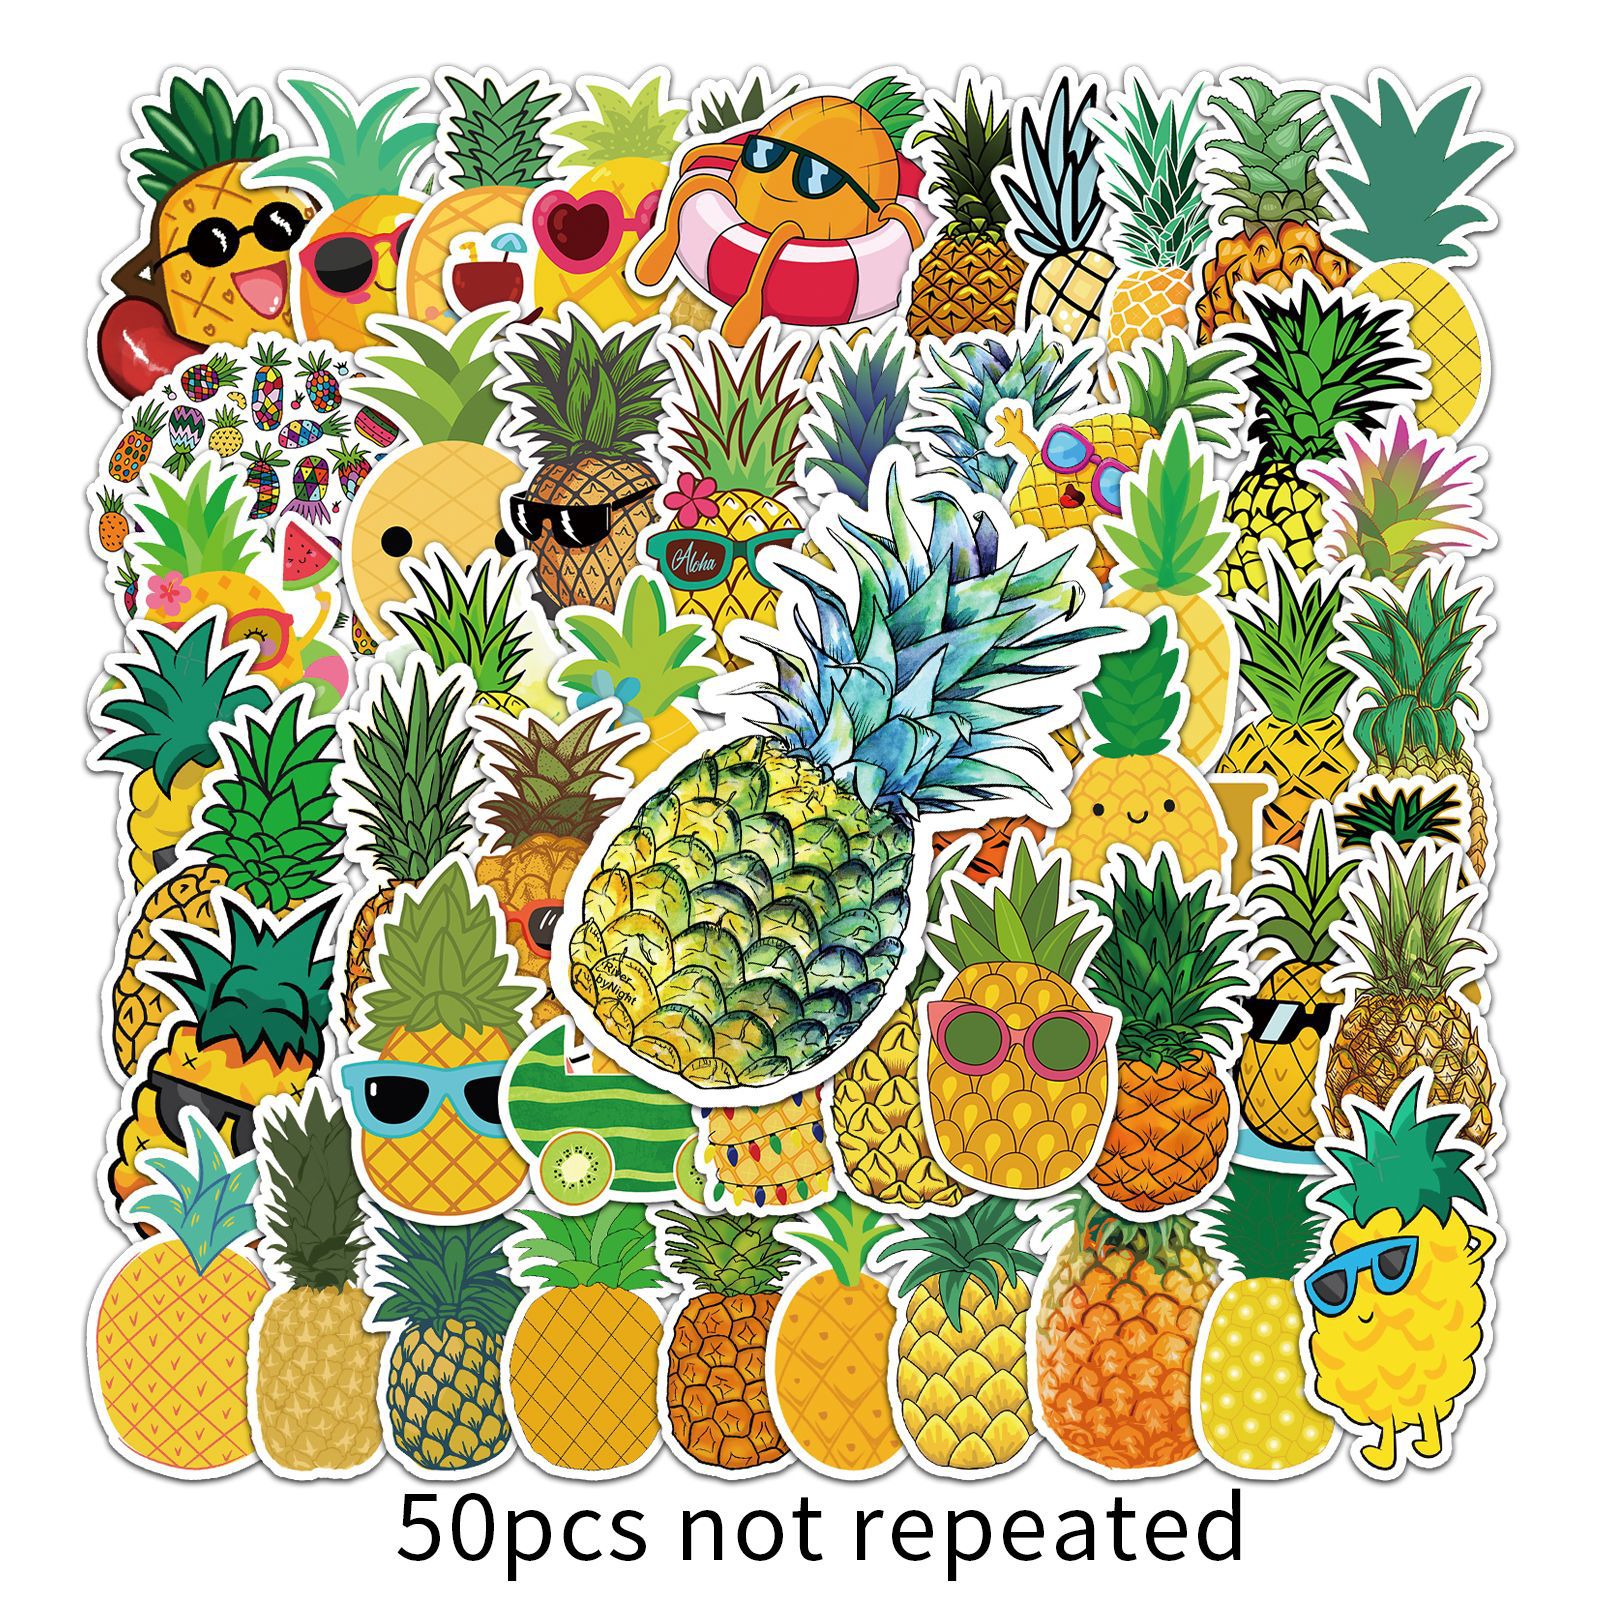 

50PCS Pineapple Stickers Cute Fruit Stickers Funny Yellow Vinyl Aesthetic Waterproof Sticker for Laptop Water Bottles Luggage Computer